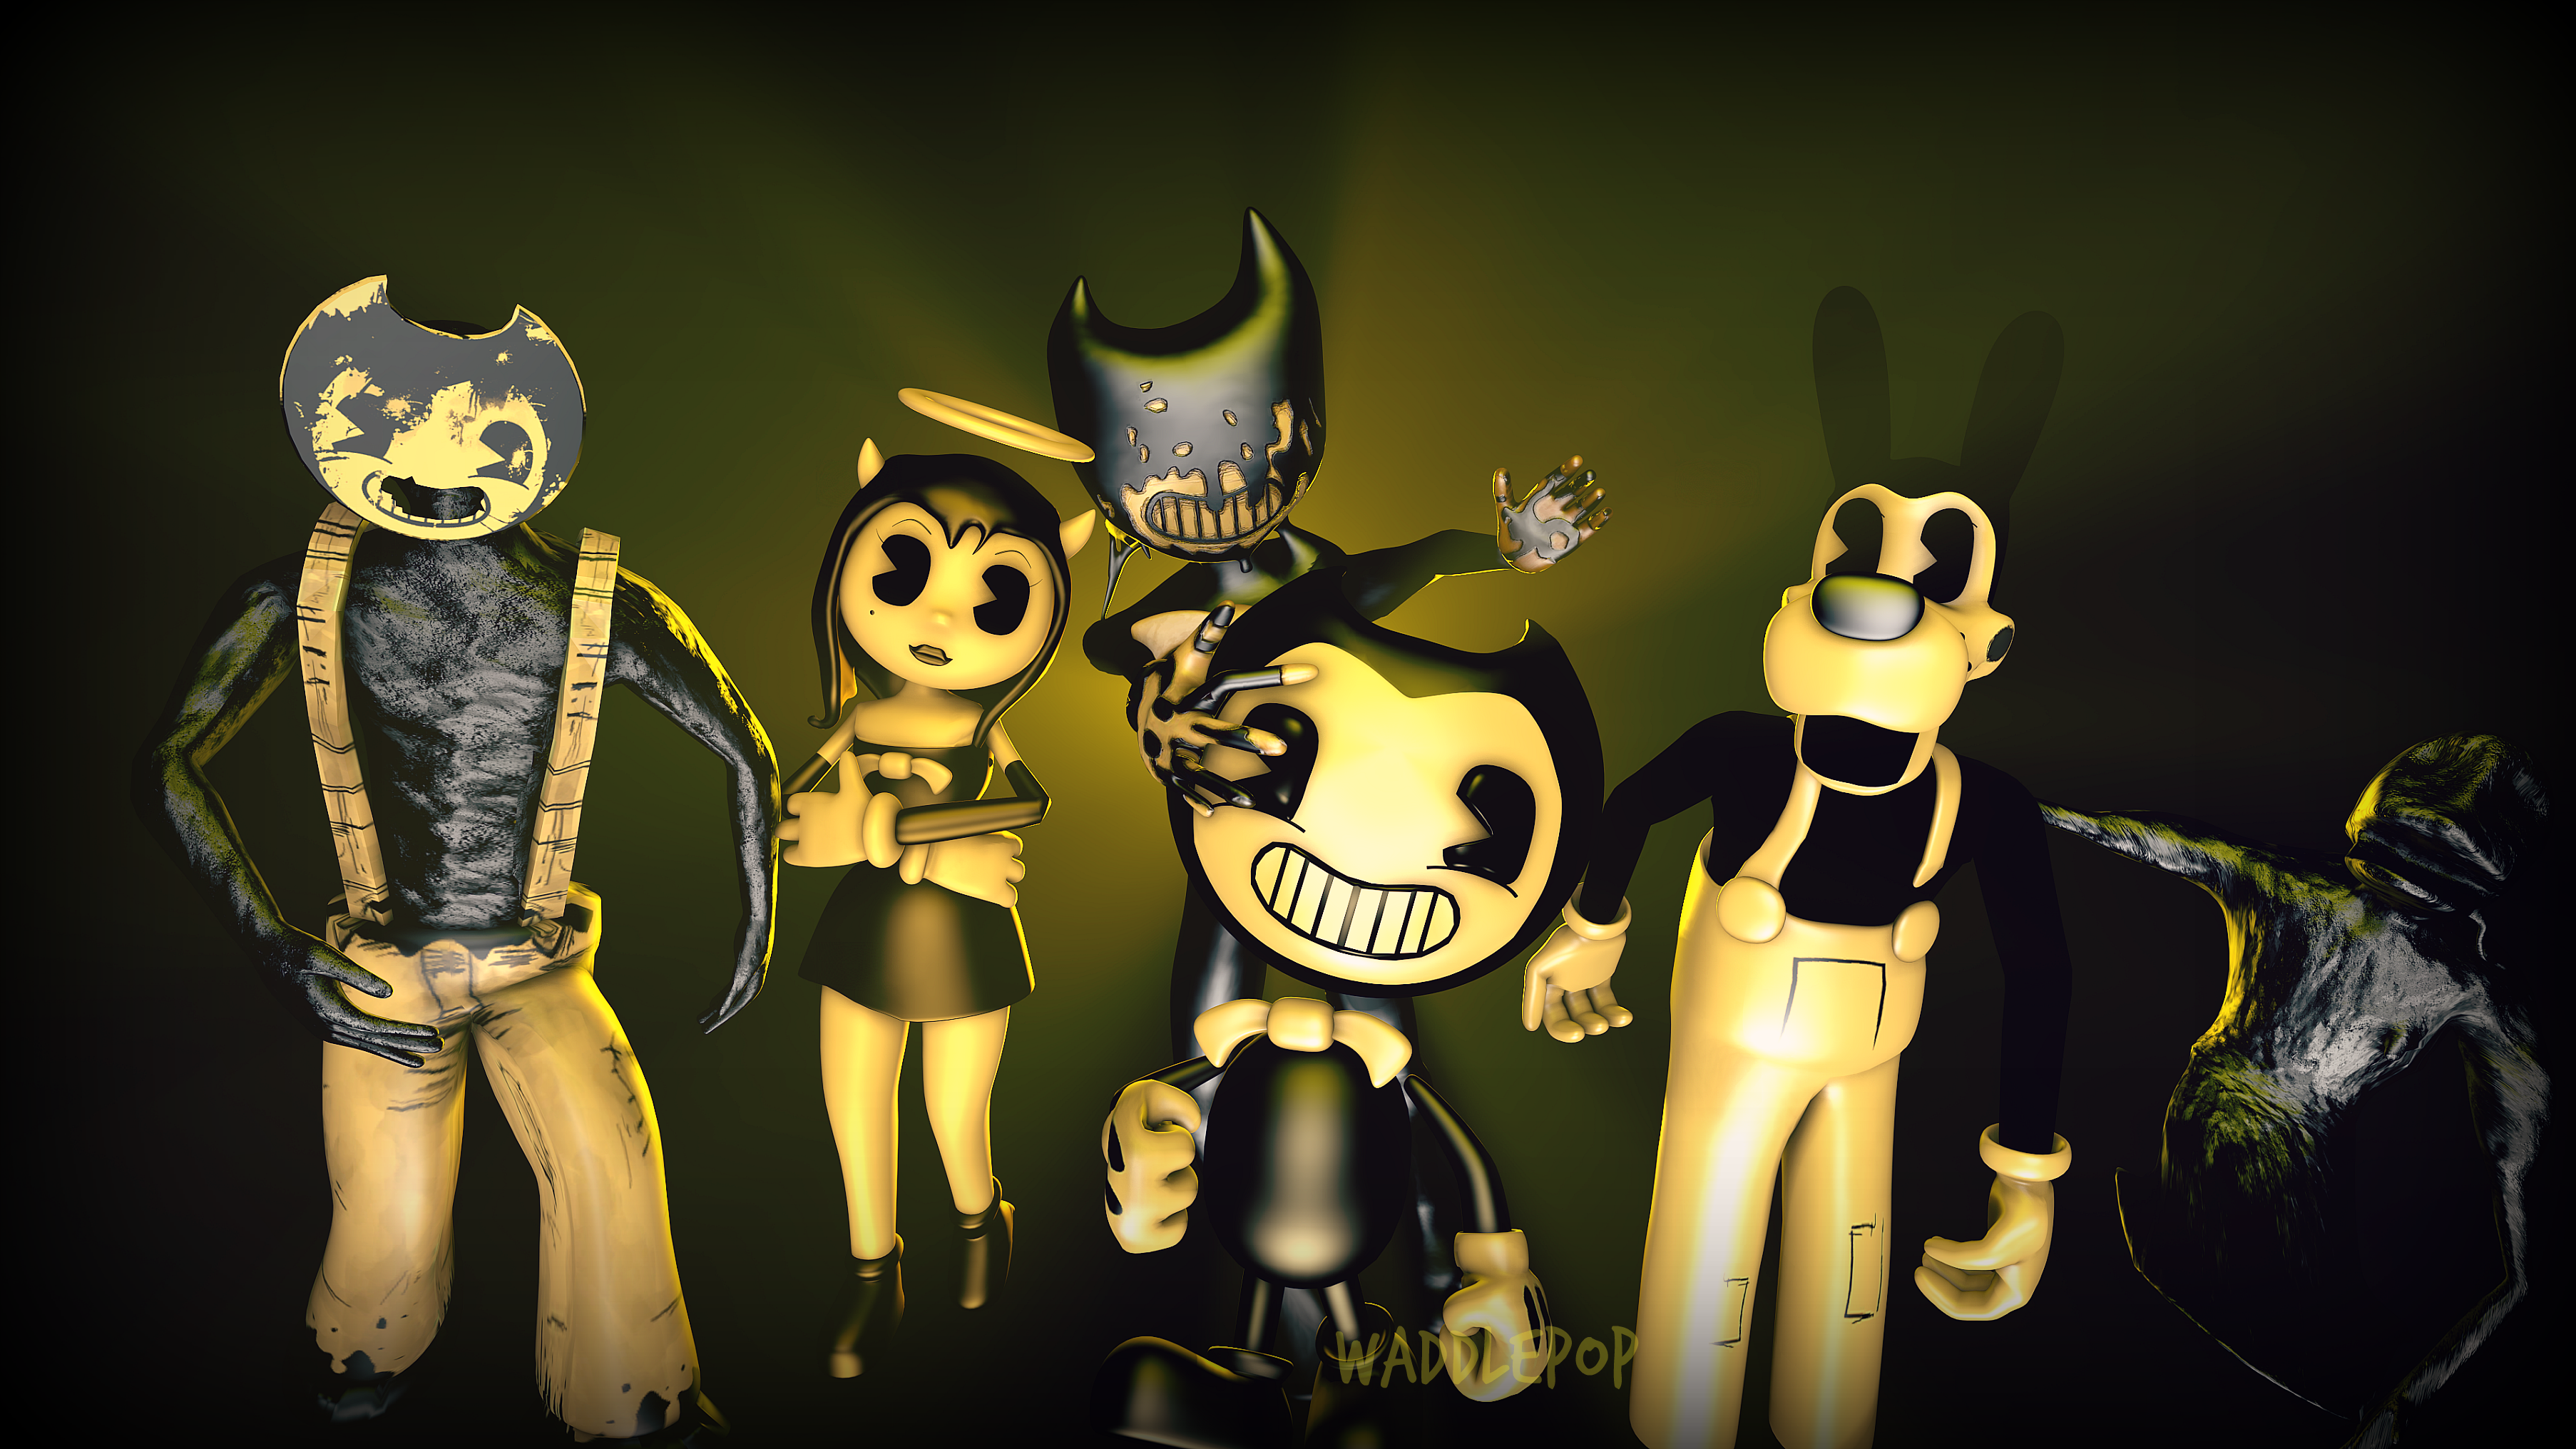 adventure bendy and the ink machine Characters V2 by aidenmoonstudios on  DeviantArt